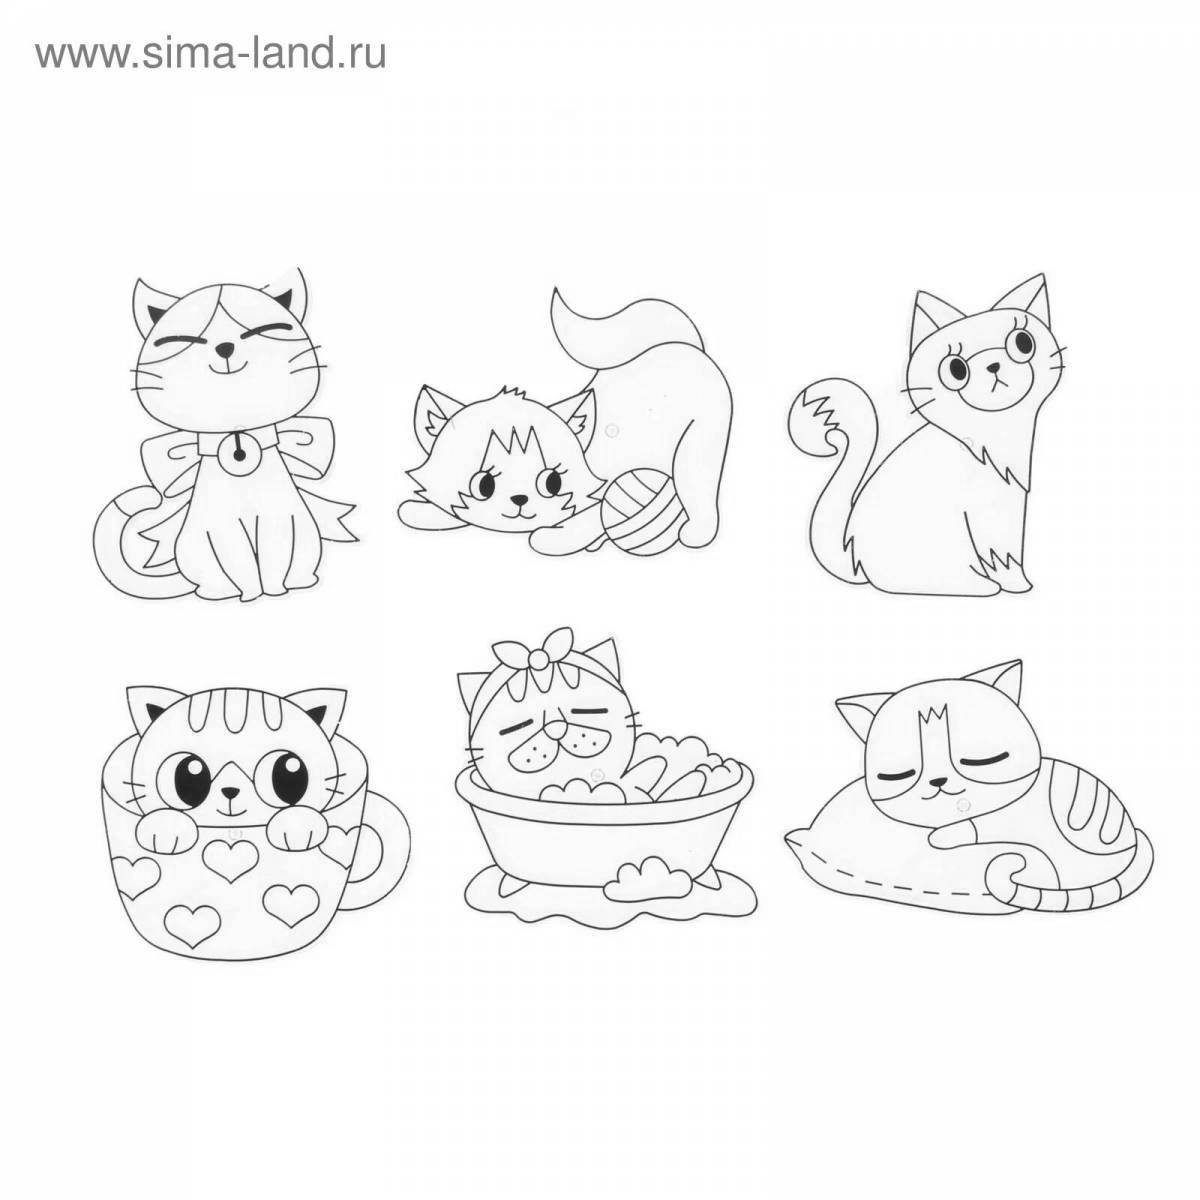 Snuggly-cuddly kittens coloring page